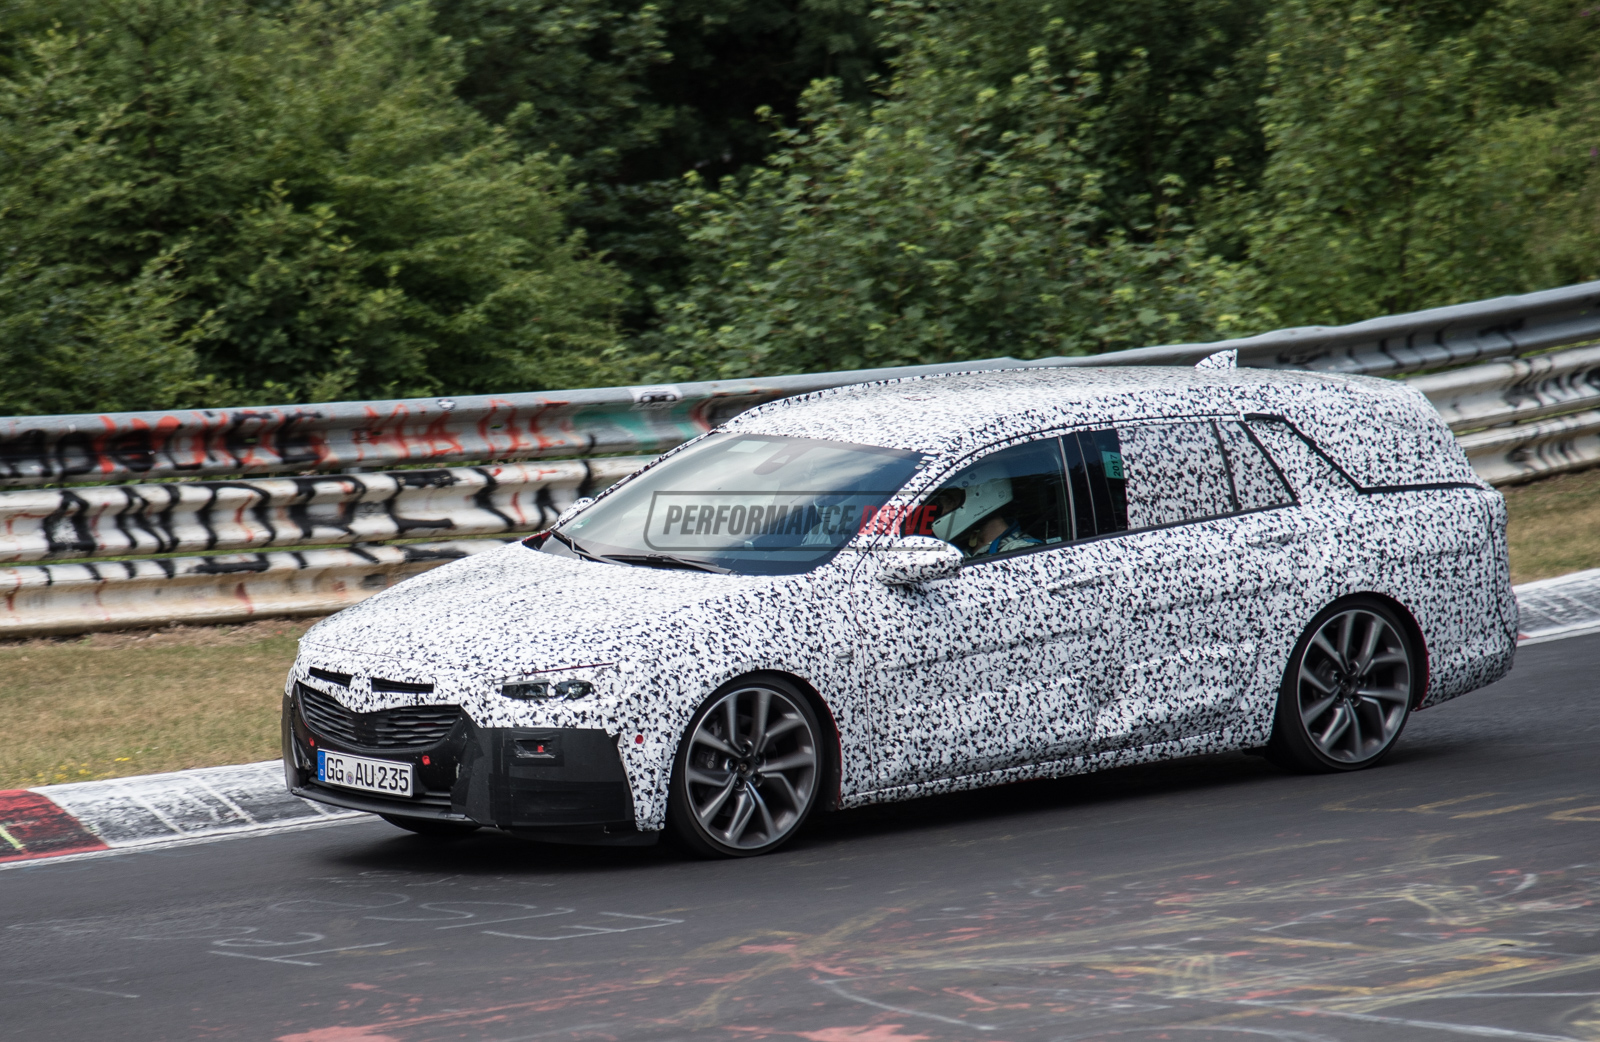 2018 Opel Insignia OPC wagon spotted, new Commodore ‘VXR’?